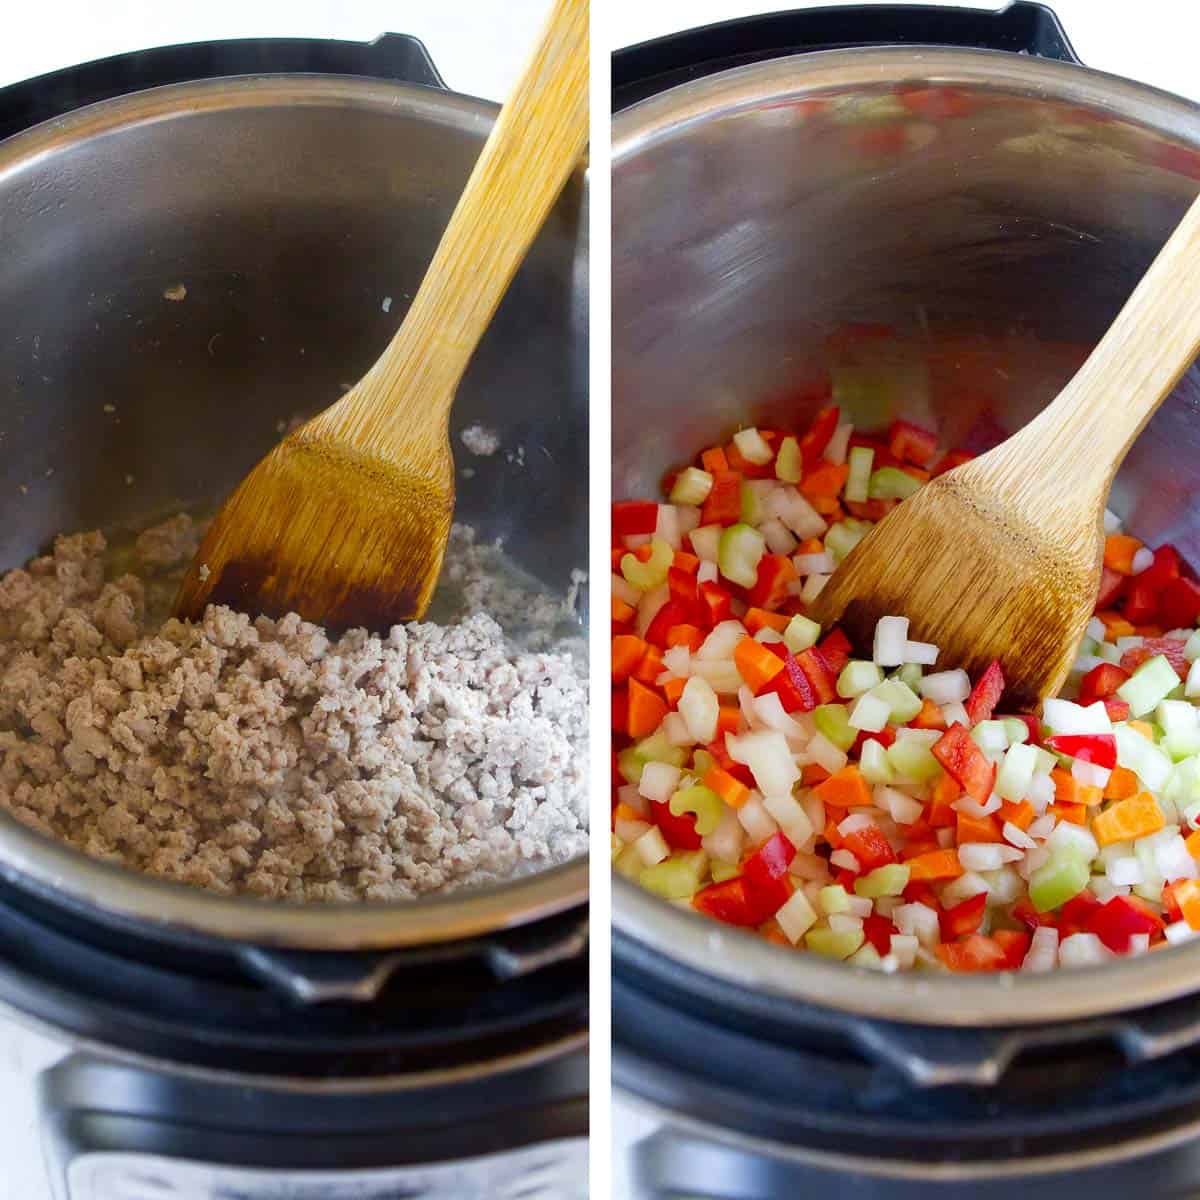 Cooked ground turkey and diced vegetables in an Instant Pot.